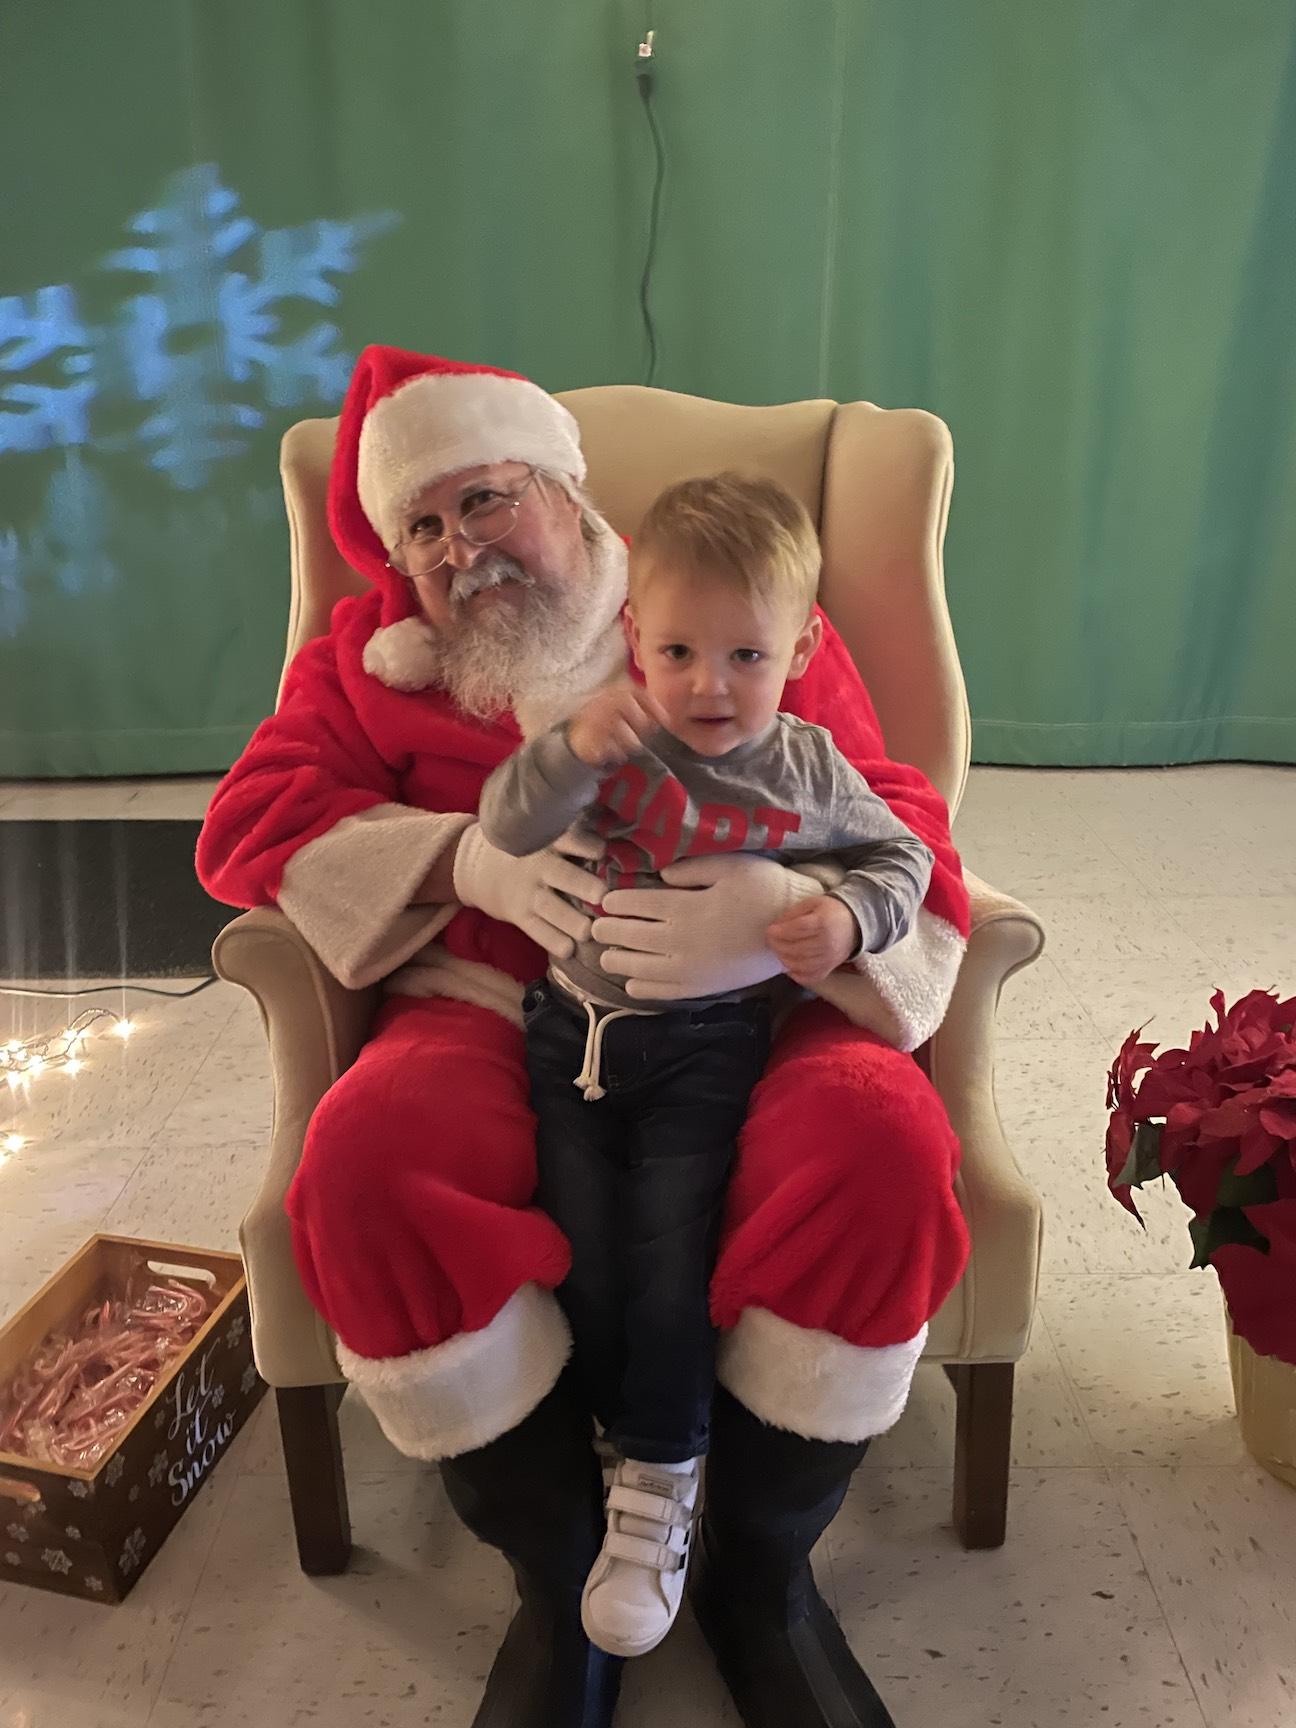 Carter Cerutti had a nice visit with special guest, Santa Claus